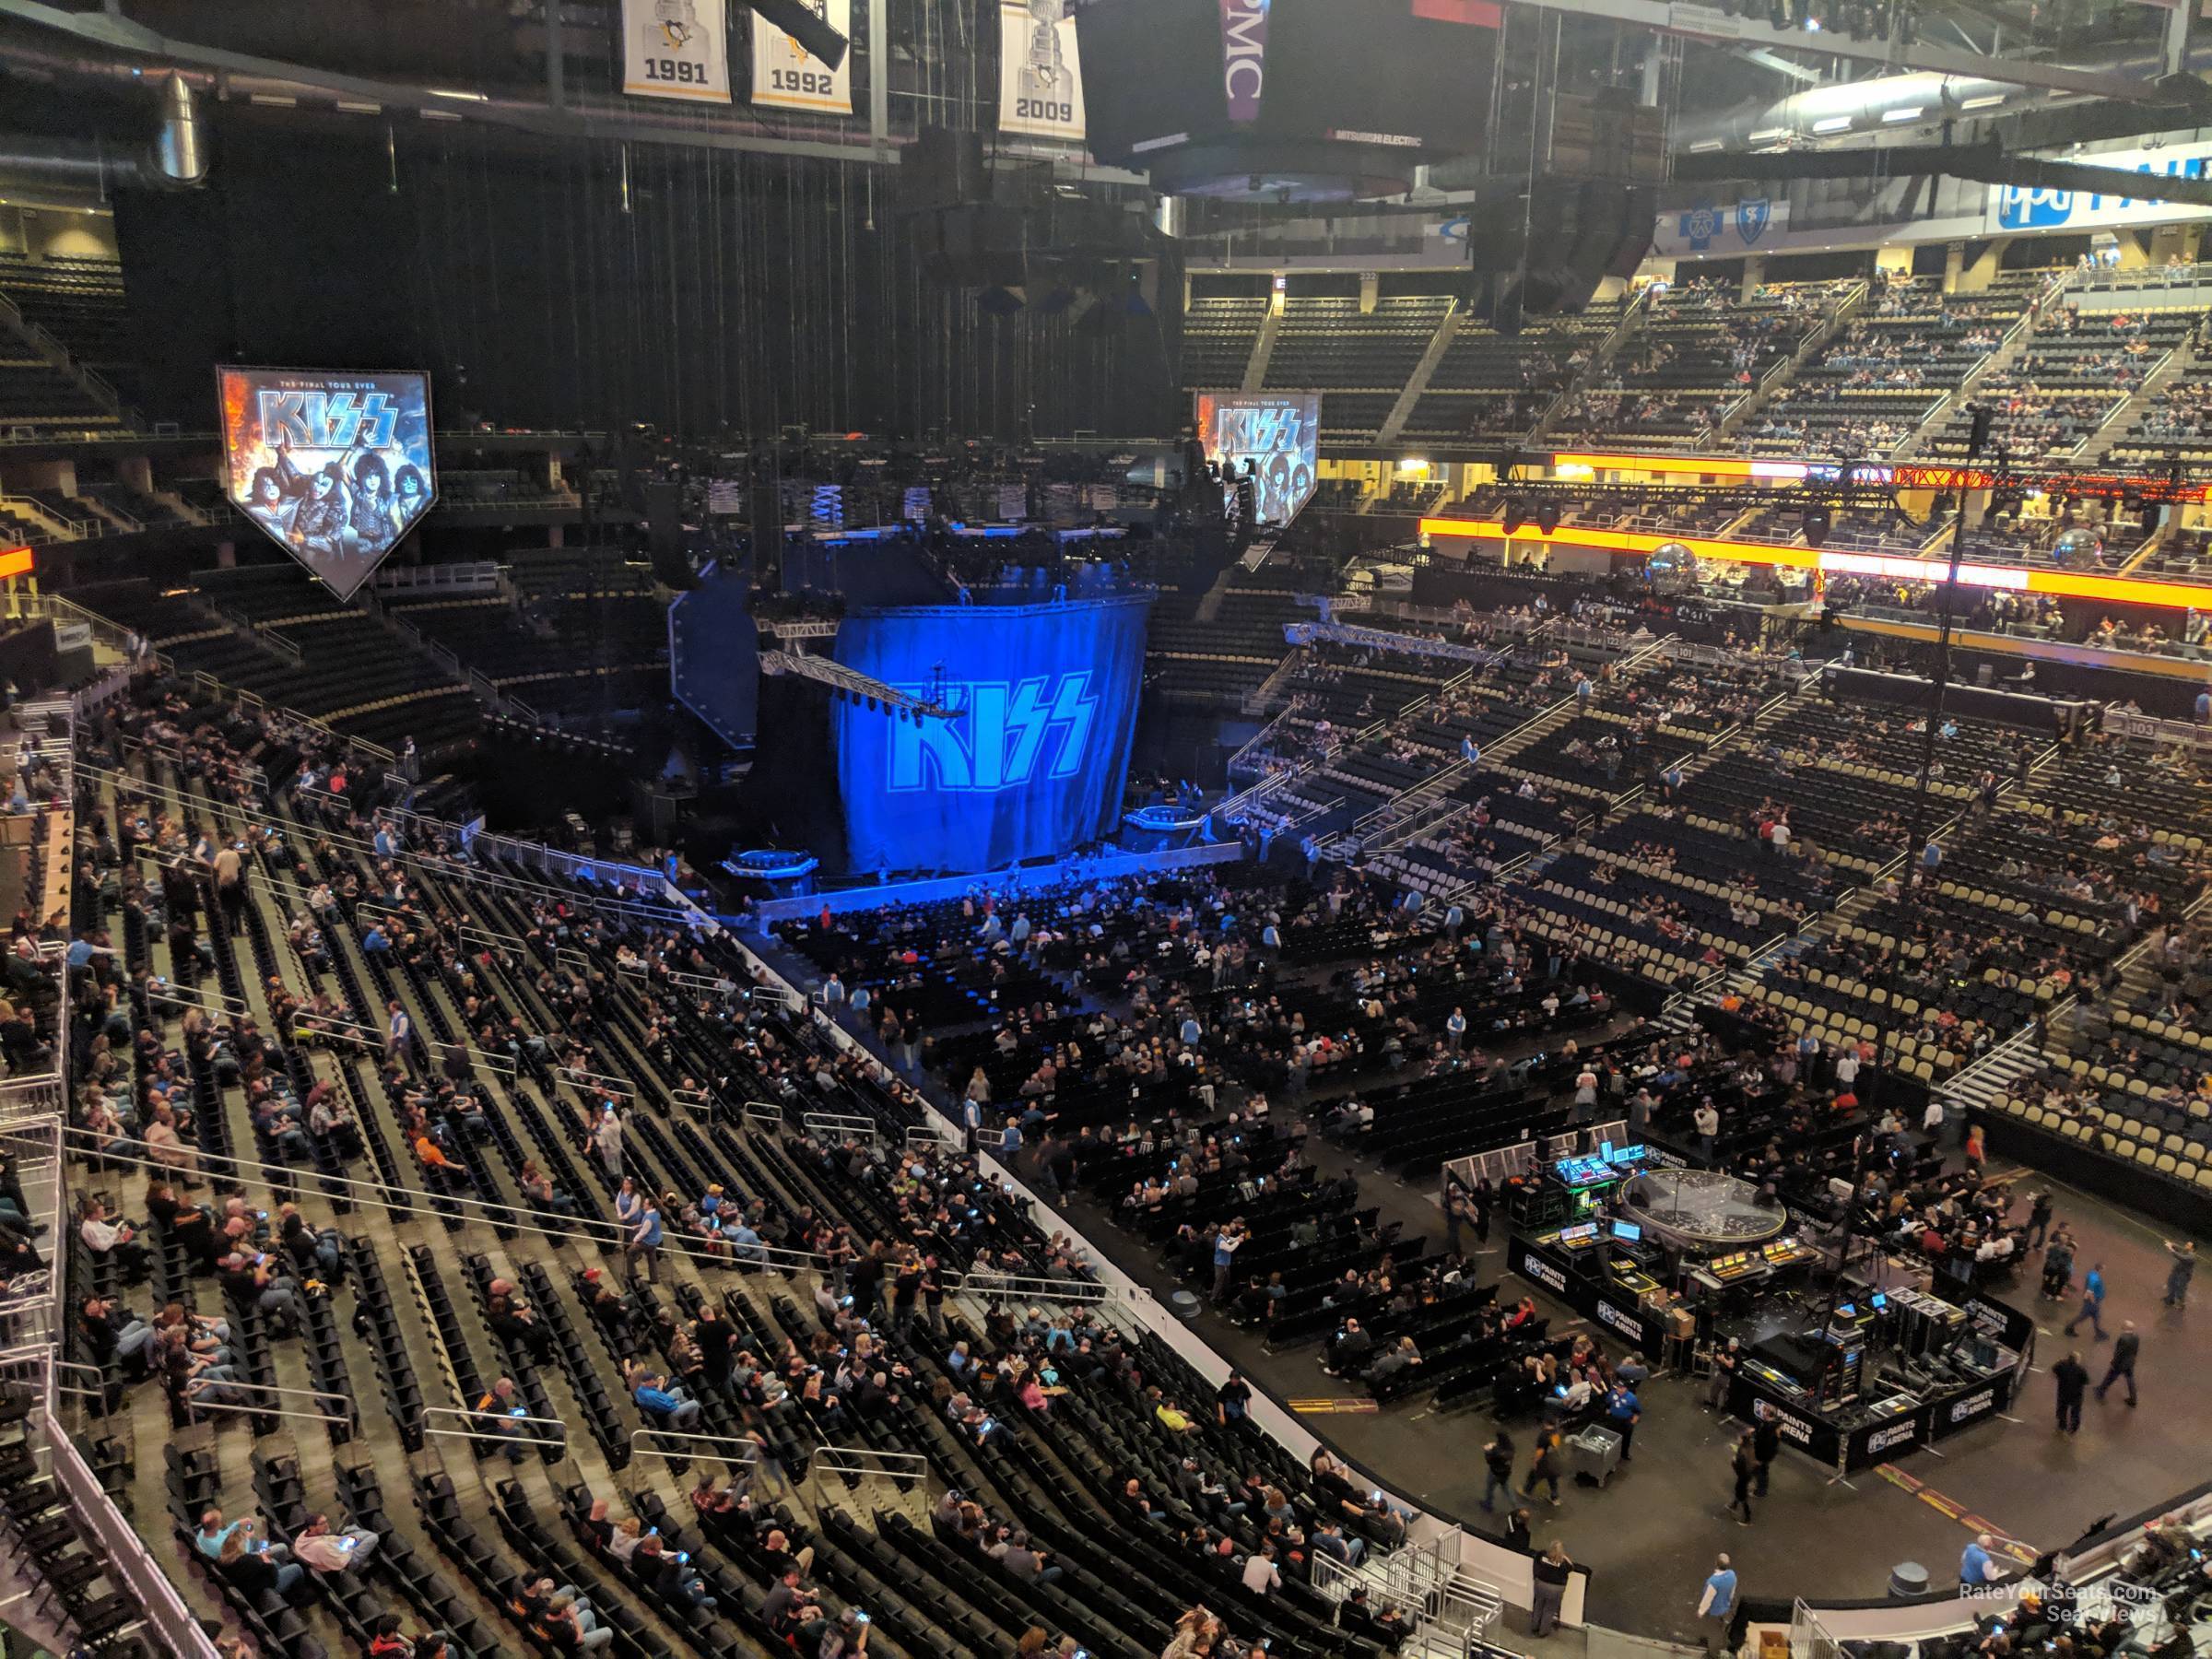 section 215, row c seat view  for concert - ppg paints arena